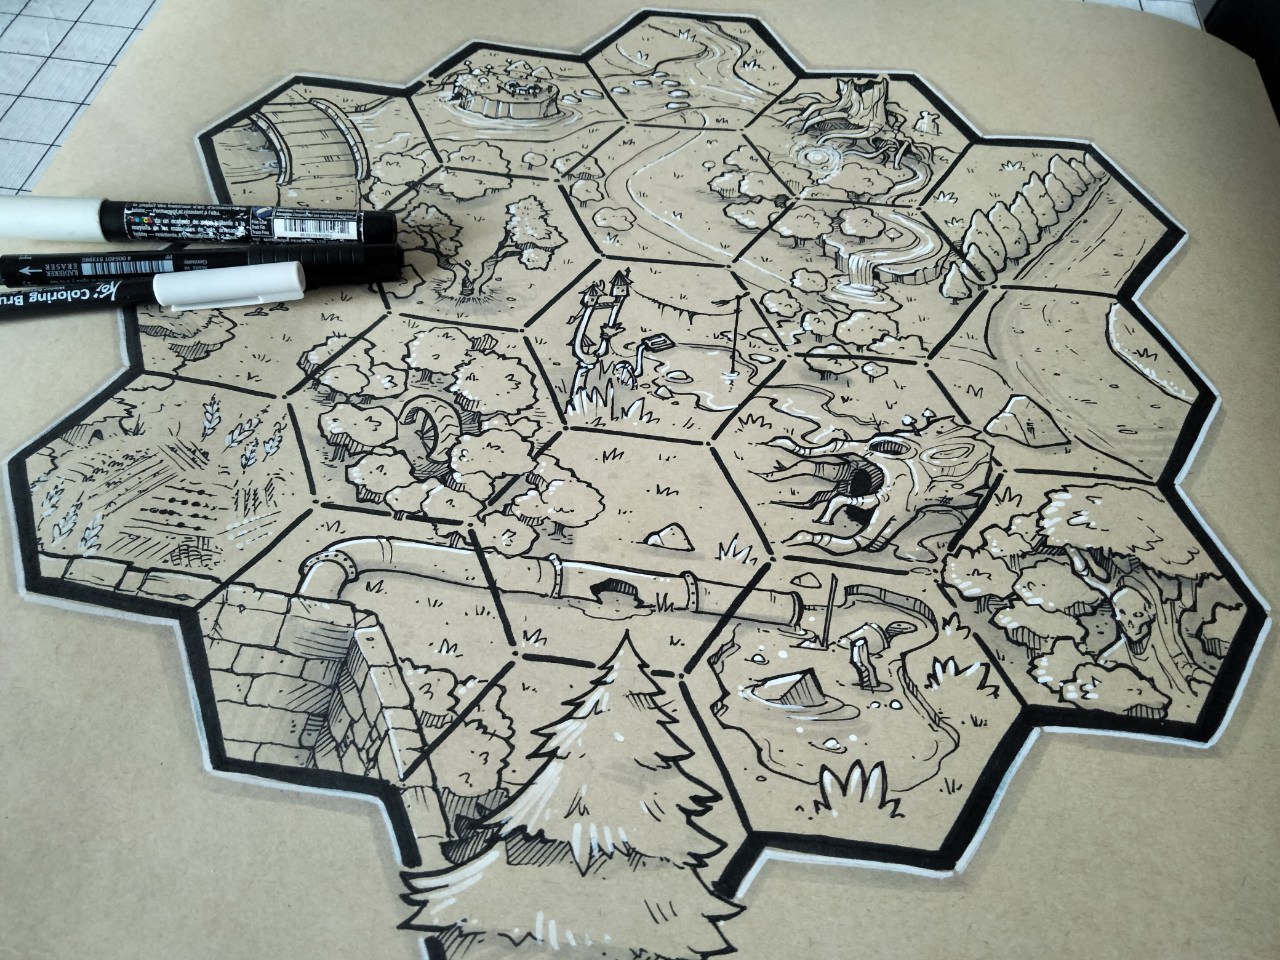 Map that Isaac Williams (creator of Mausritter) posted online using the  HEXCRAWL TOOLBOX by Games Omnivorous. The toolbox comes with 150 physical  tiles that you can use to create your own maps